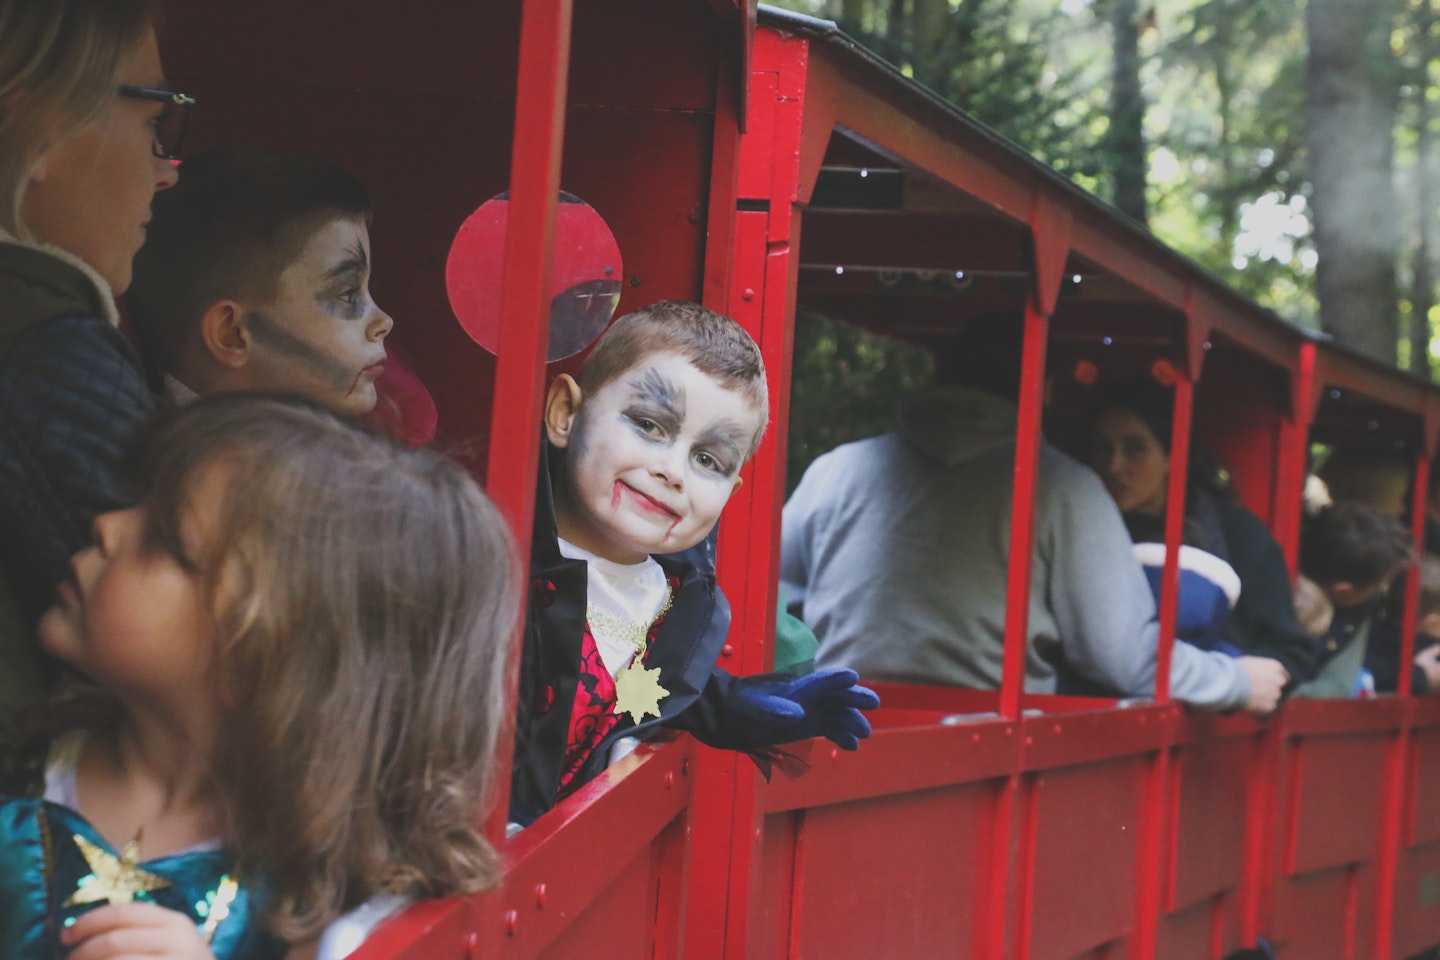 Child dressed as vampire riding the train